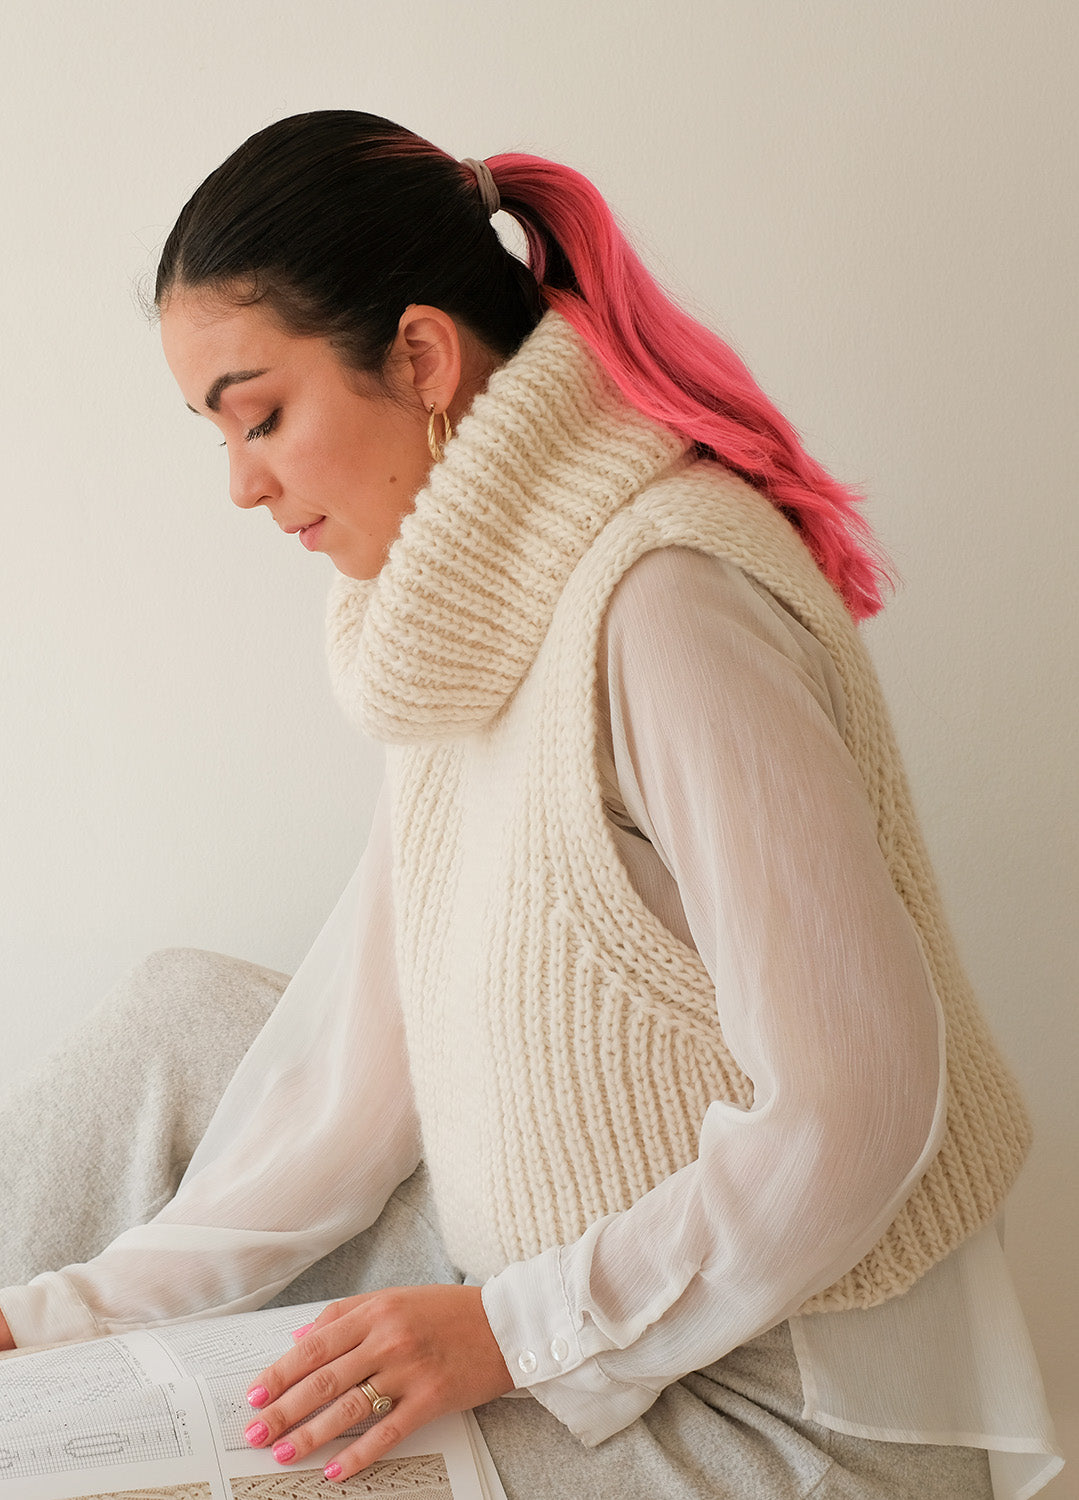 Cloud Slipover x @life_is_cozy – We are knitters